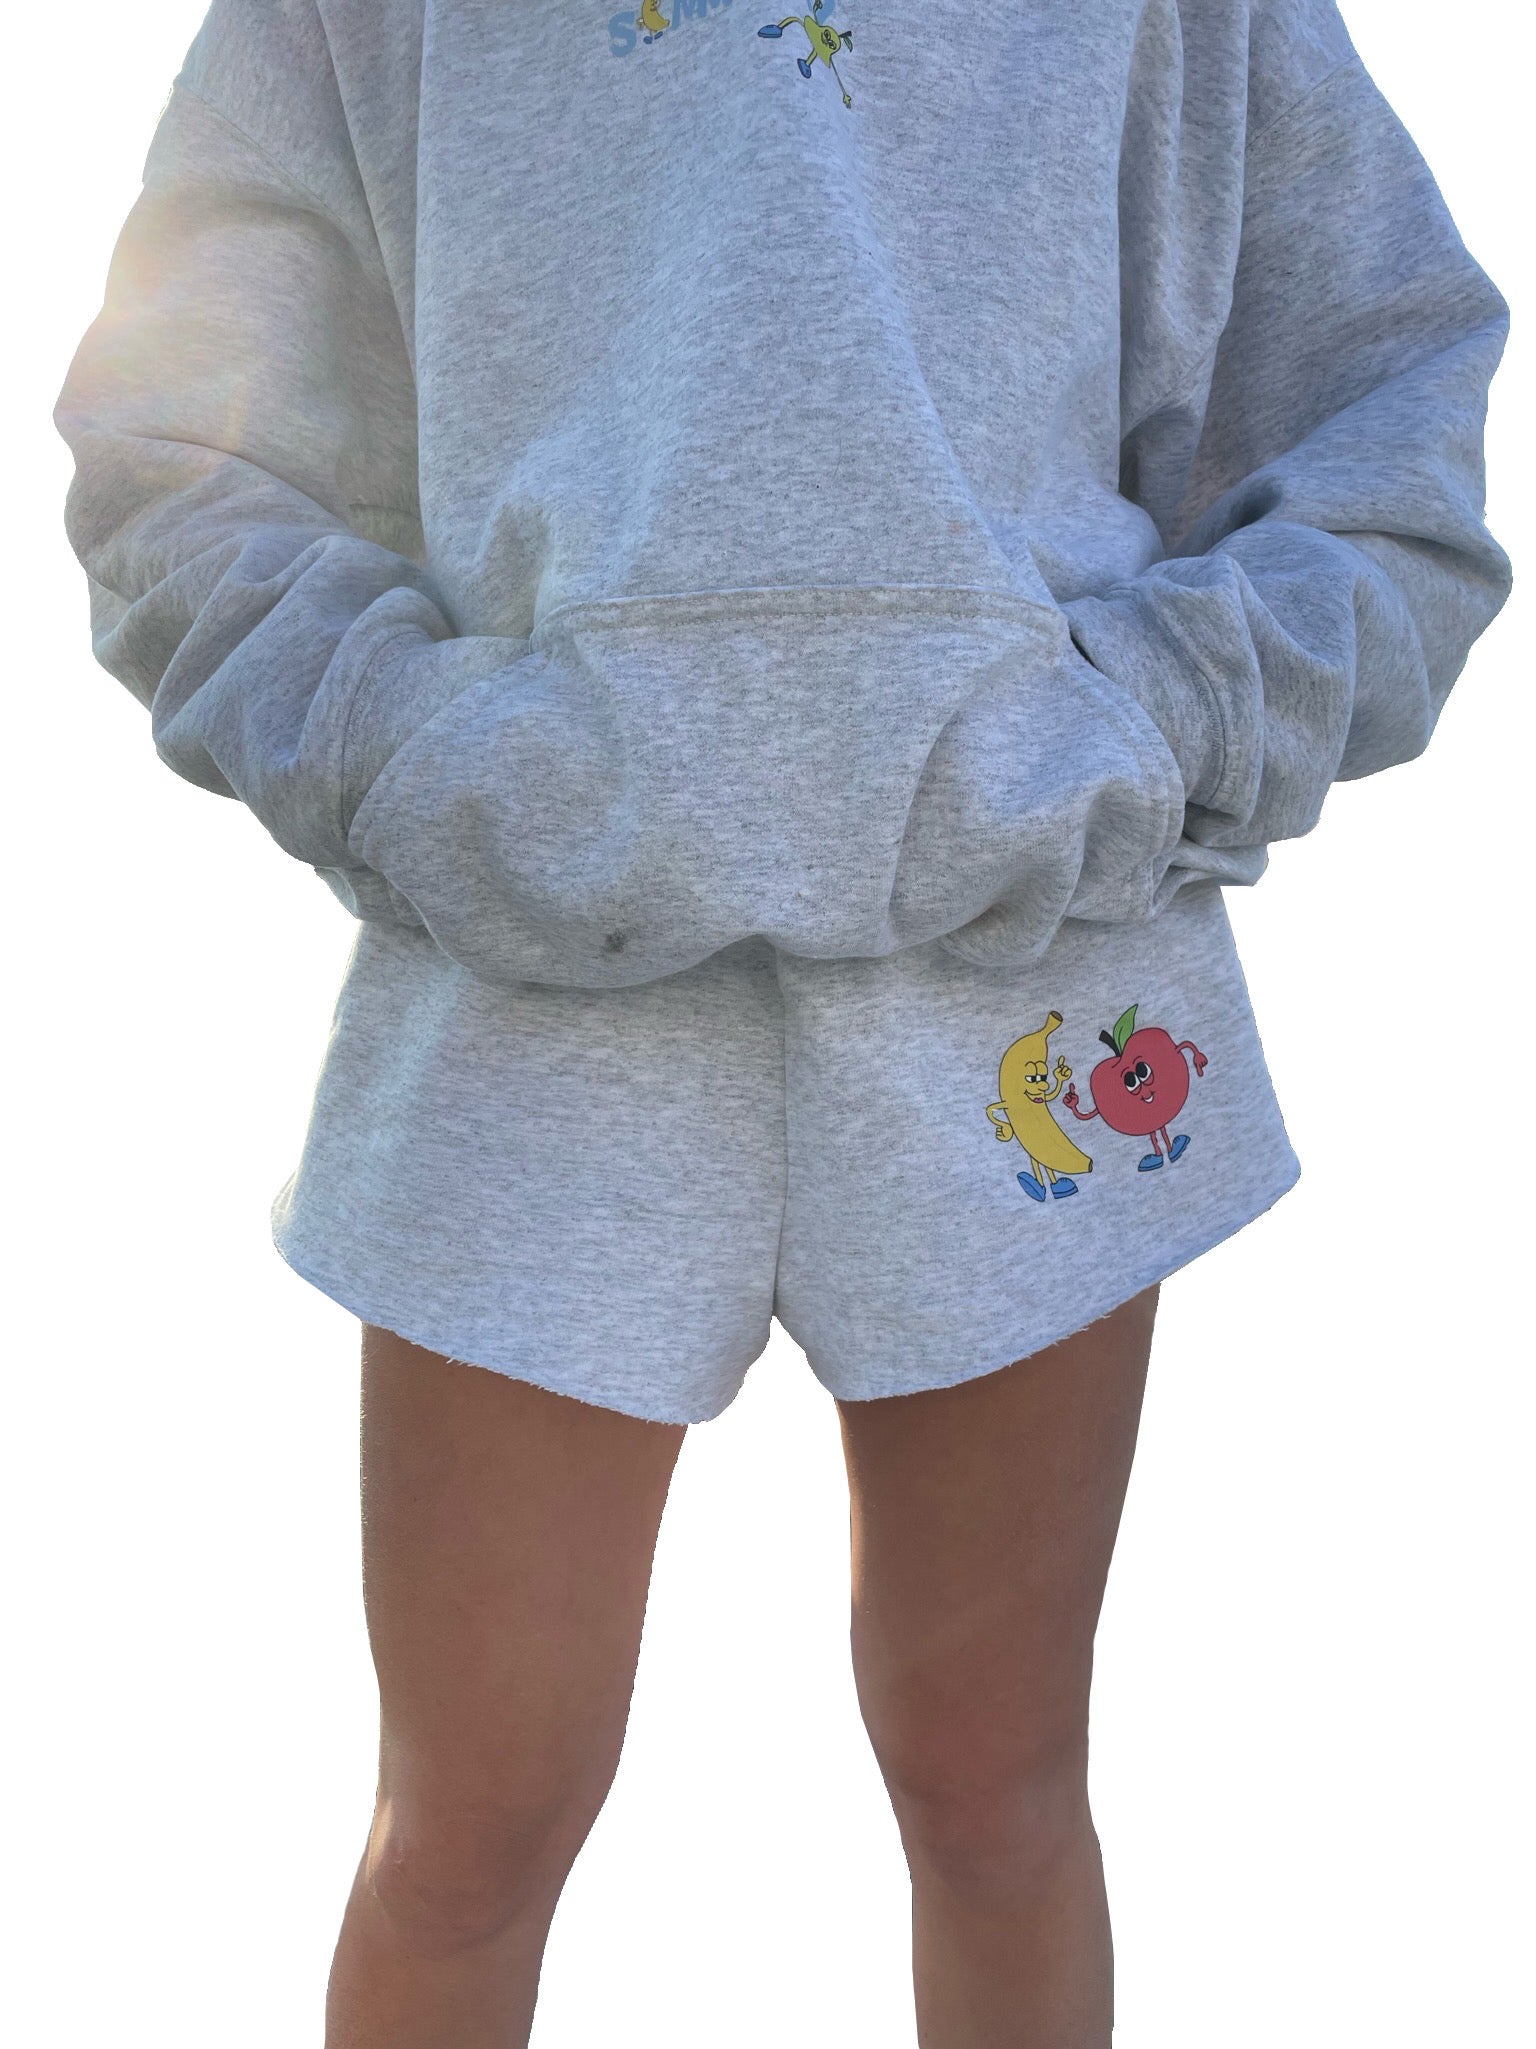 The 'KIDS WHO SURVIVED' Sweatshorts